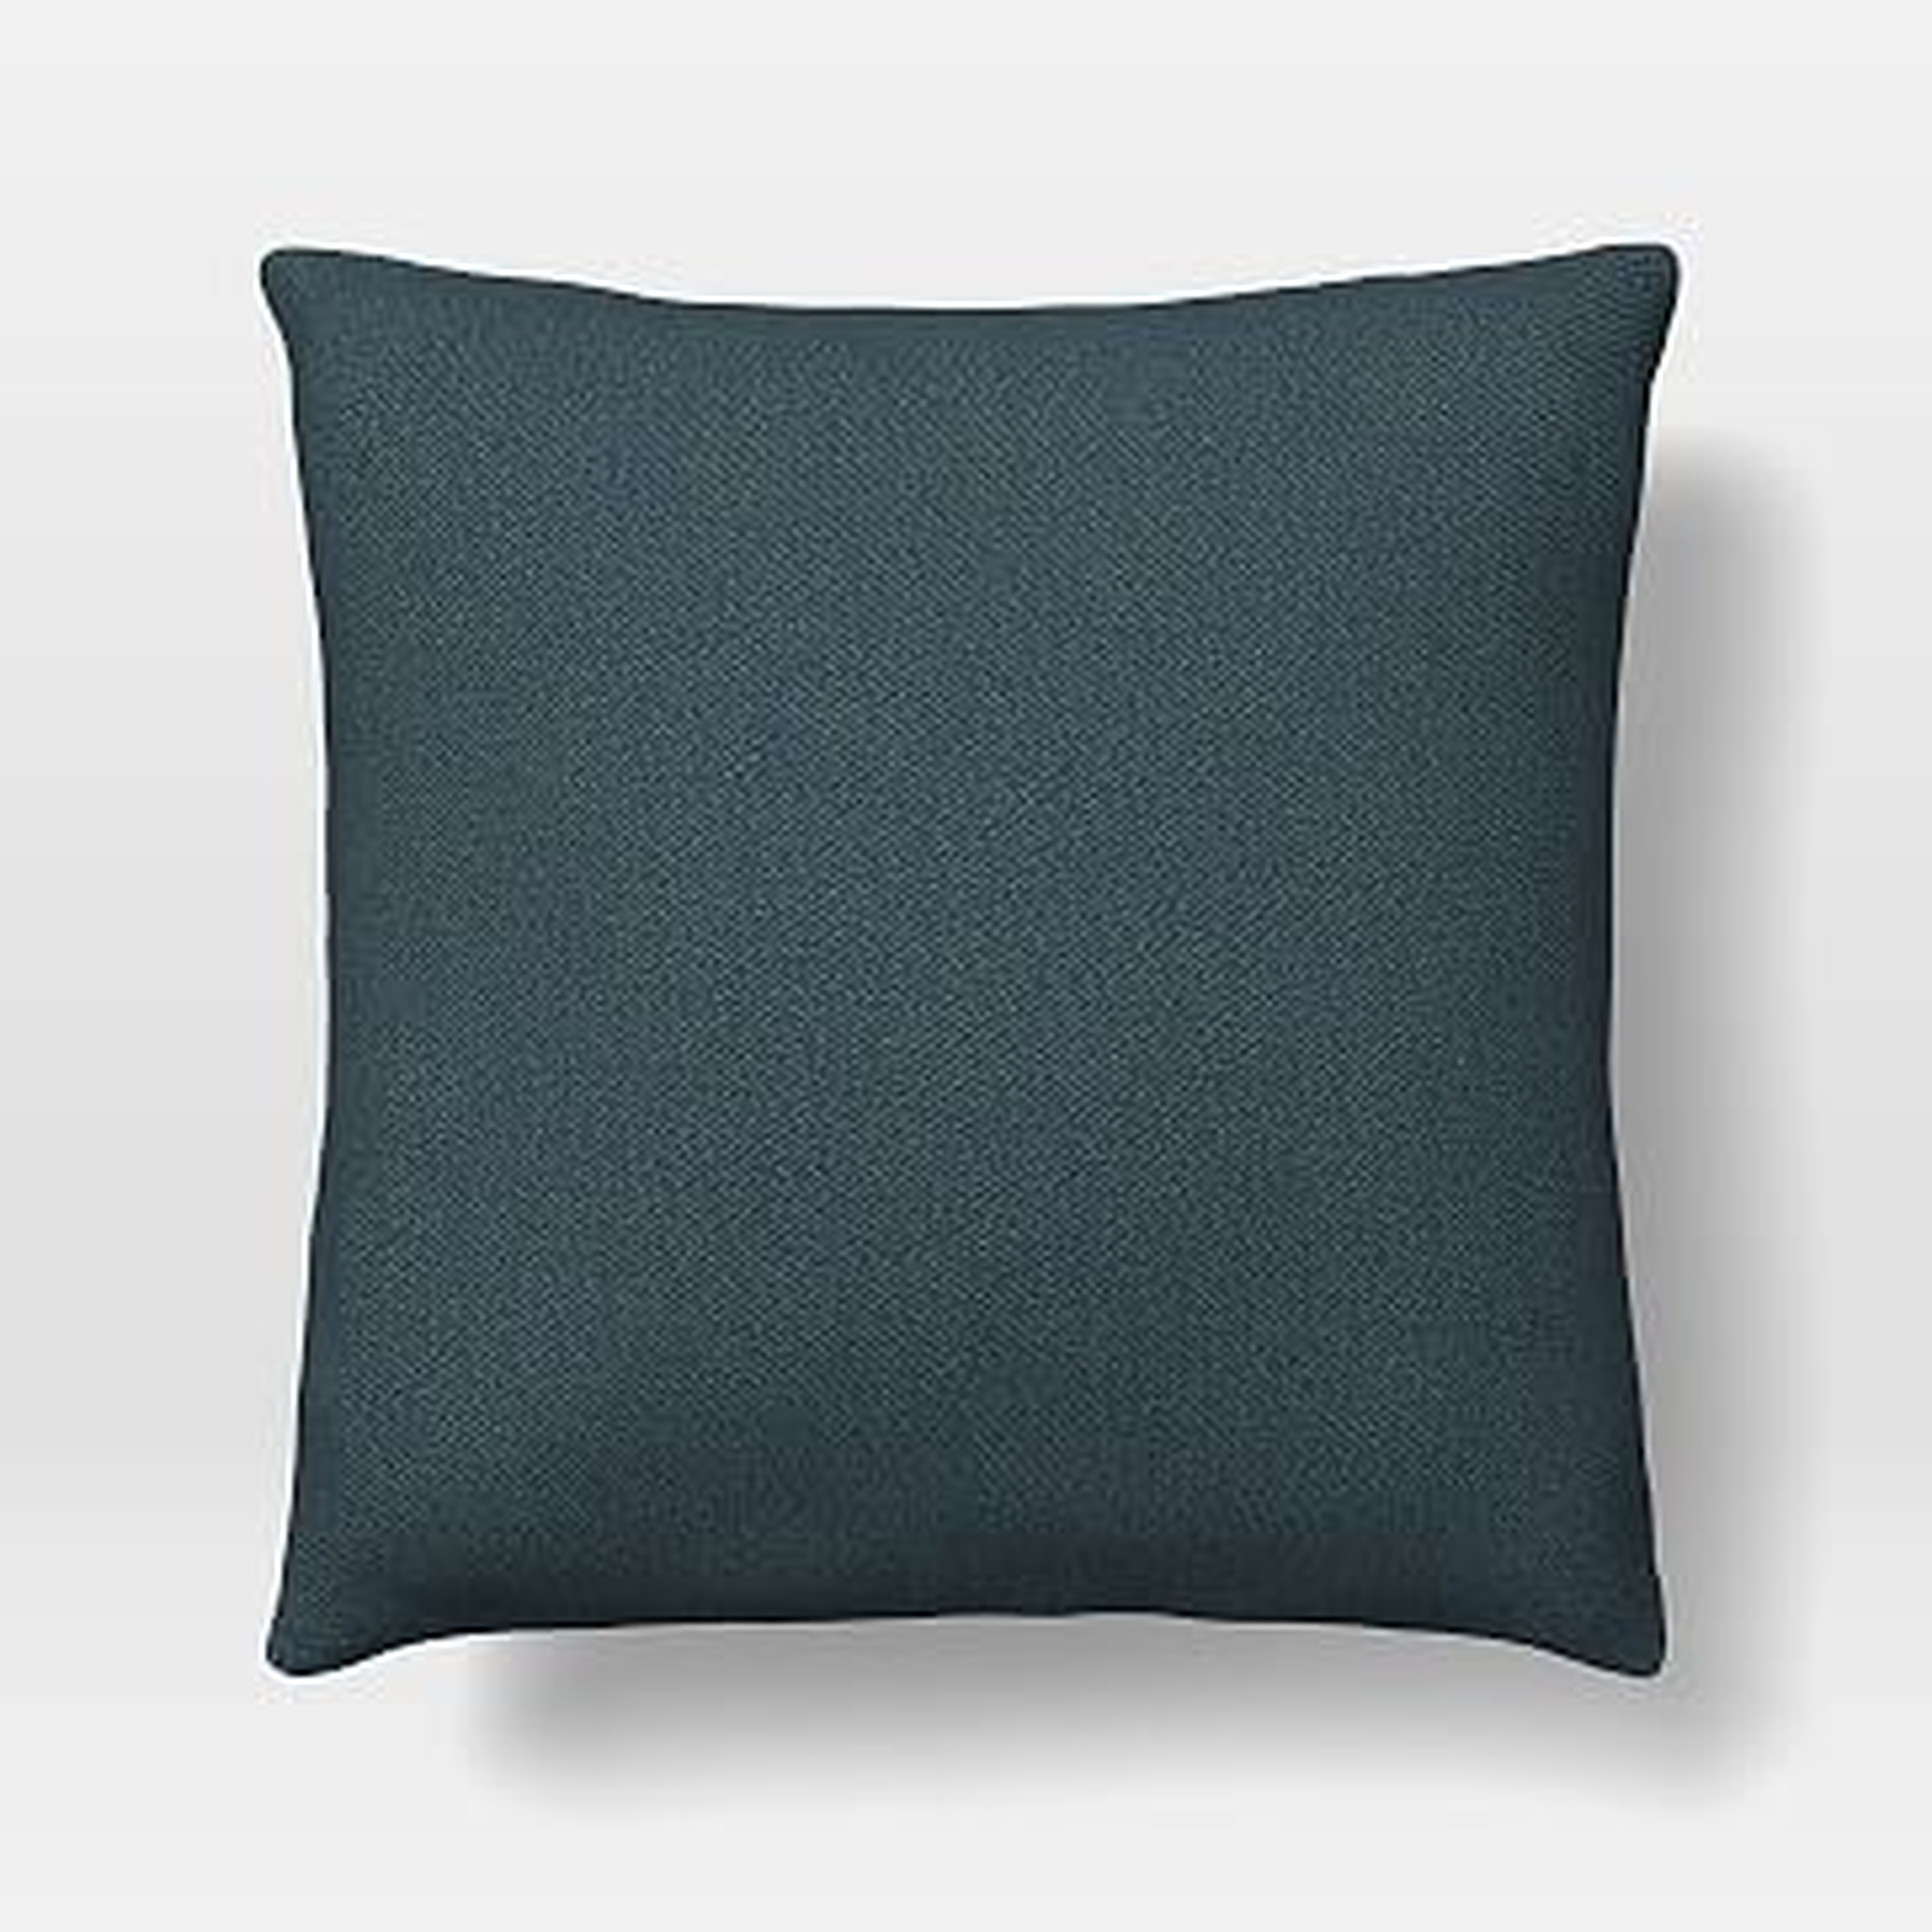 Upholstery Fabric Pillow Cover, 24"x 24" Pillow, Twill, Teal - West Elm